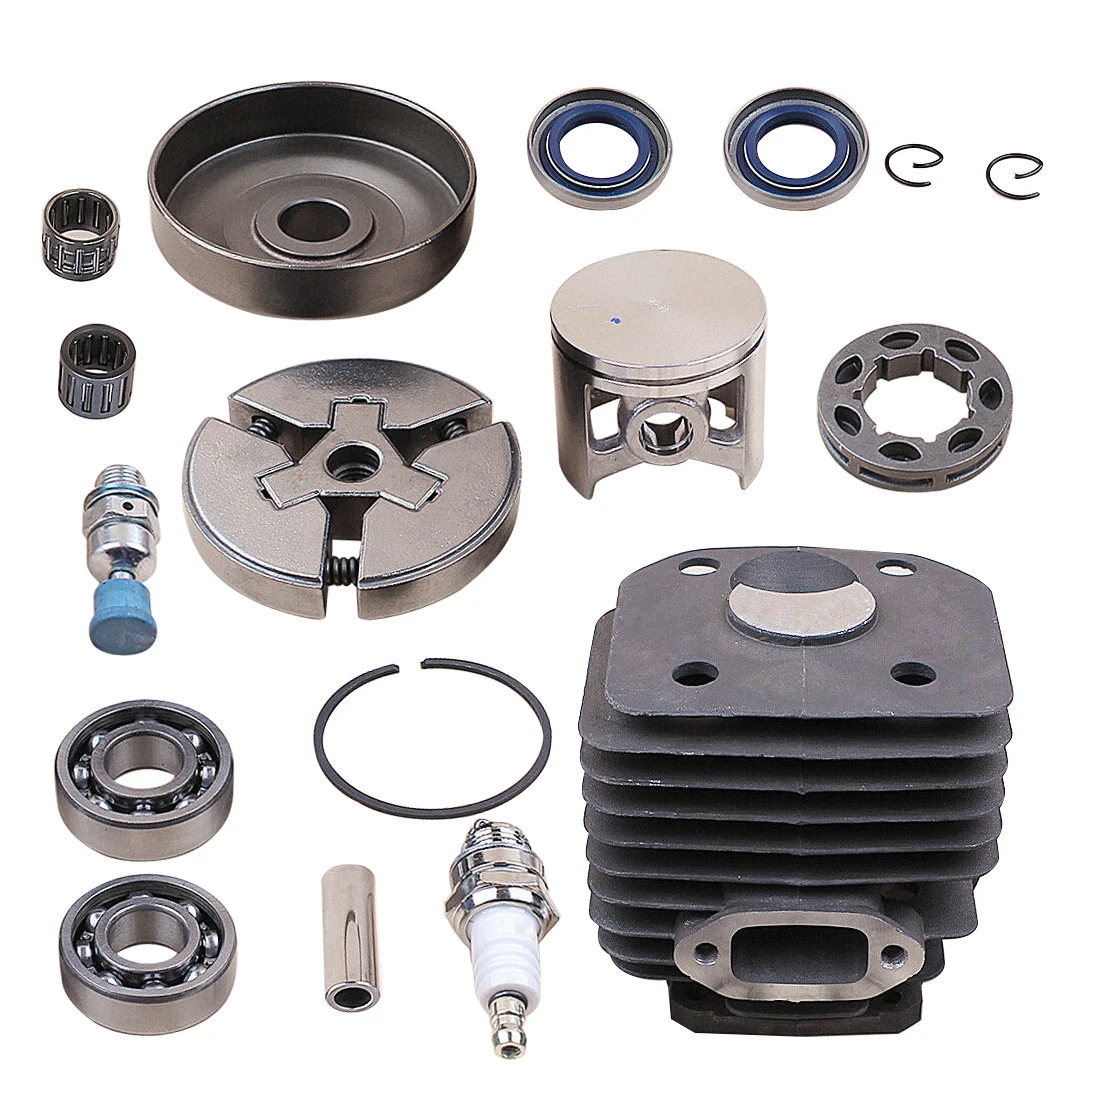 503541171 503 54 11-72 48mm Cylinder Piston Clutch Crank Bearing Kit Fit For Husqvarna 261 262 262XP Chainsaw